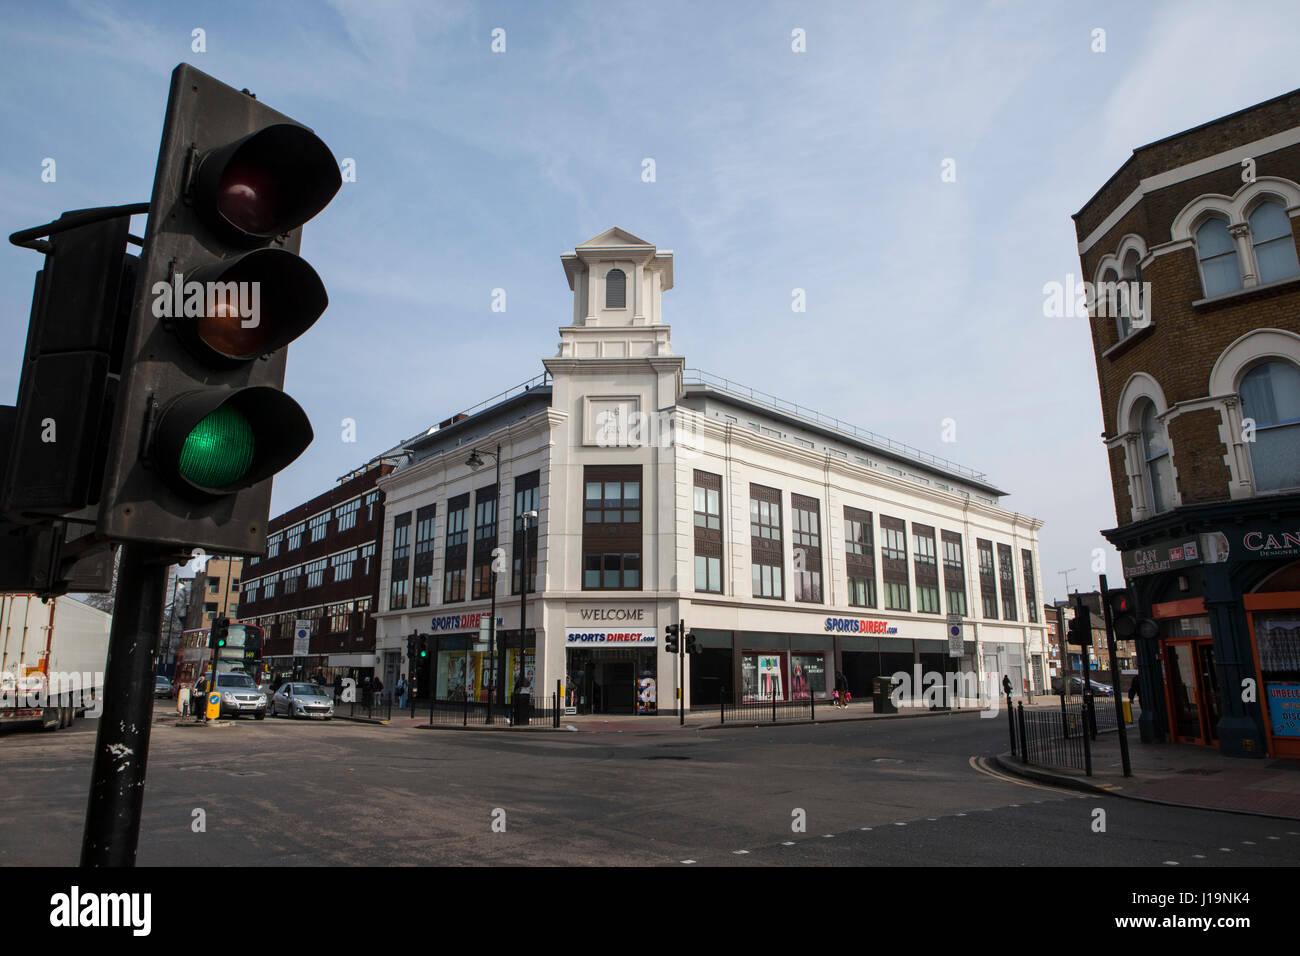 The Co-Op Building in Tottenham which was burned down during the London Riots of 2011. Now rebuilt and it houses a Sports Direct department store. It  Stock Photo